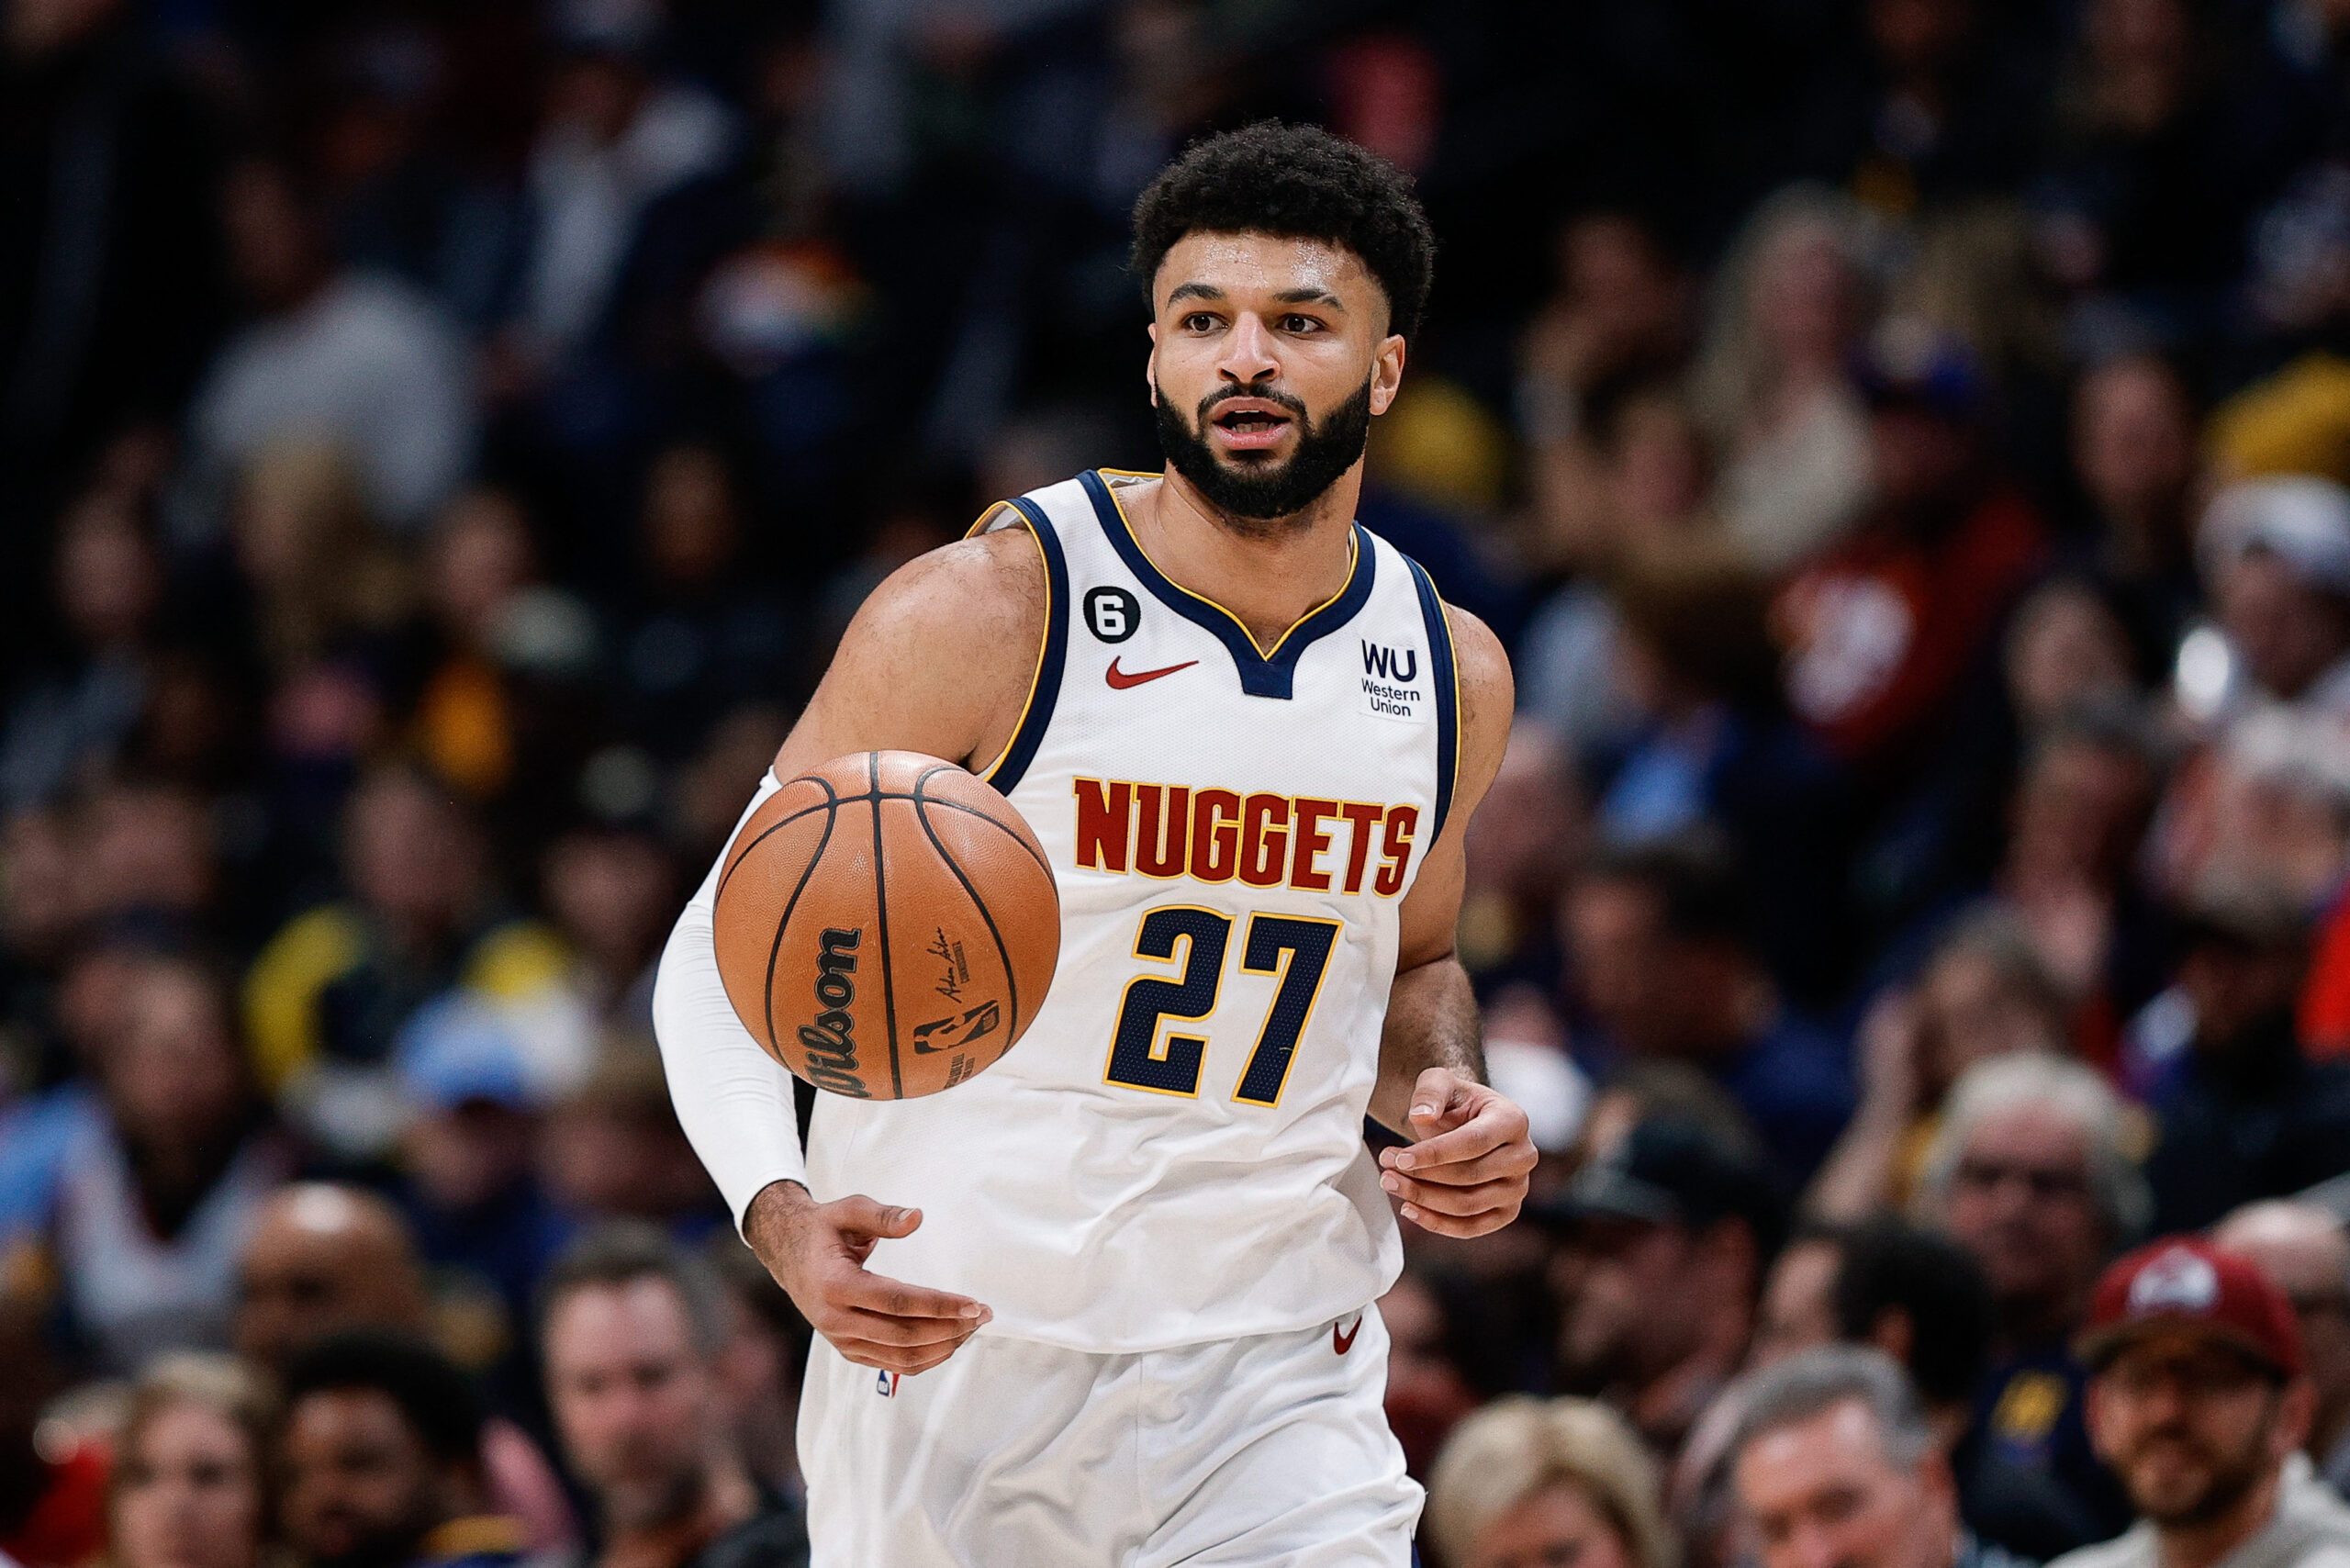 Nuggets star Jamal Murray won’t play for Canada in FIBA World Cup